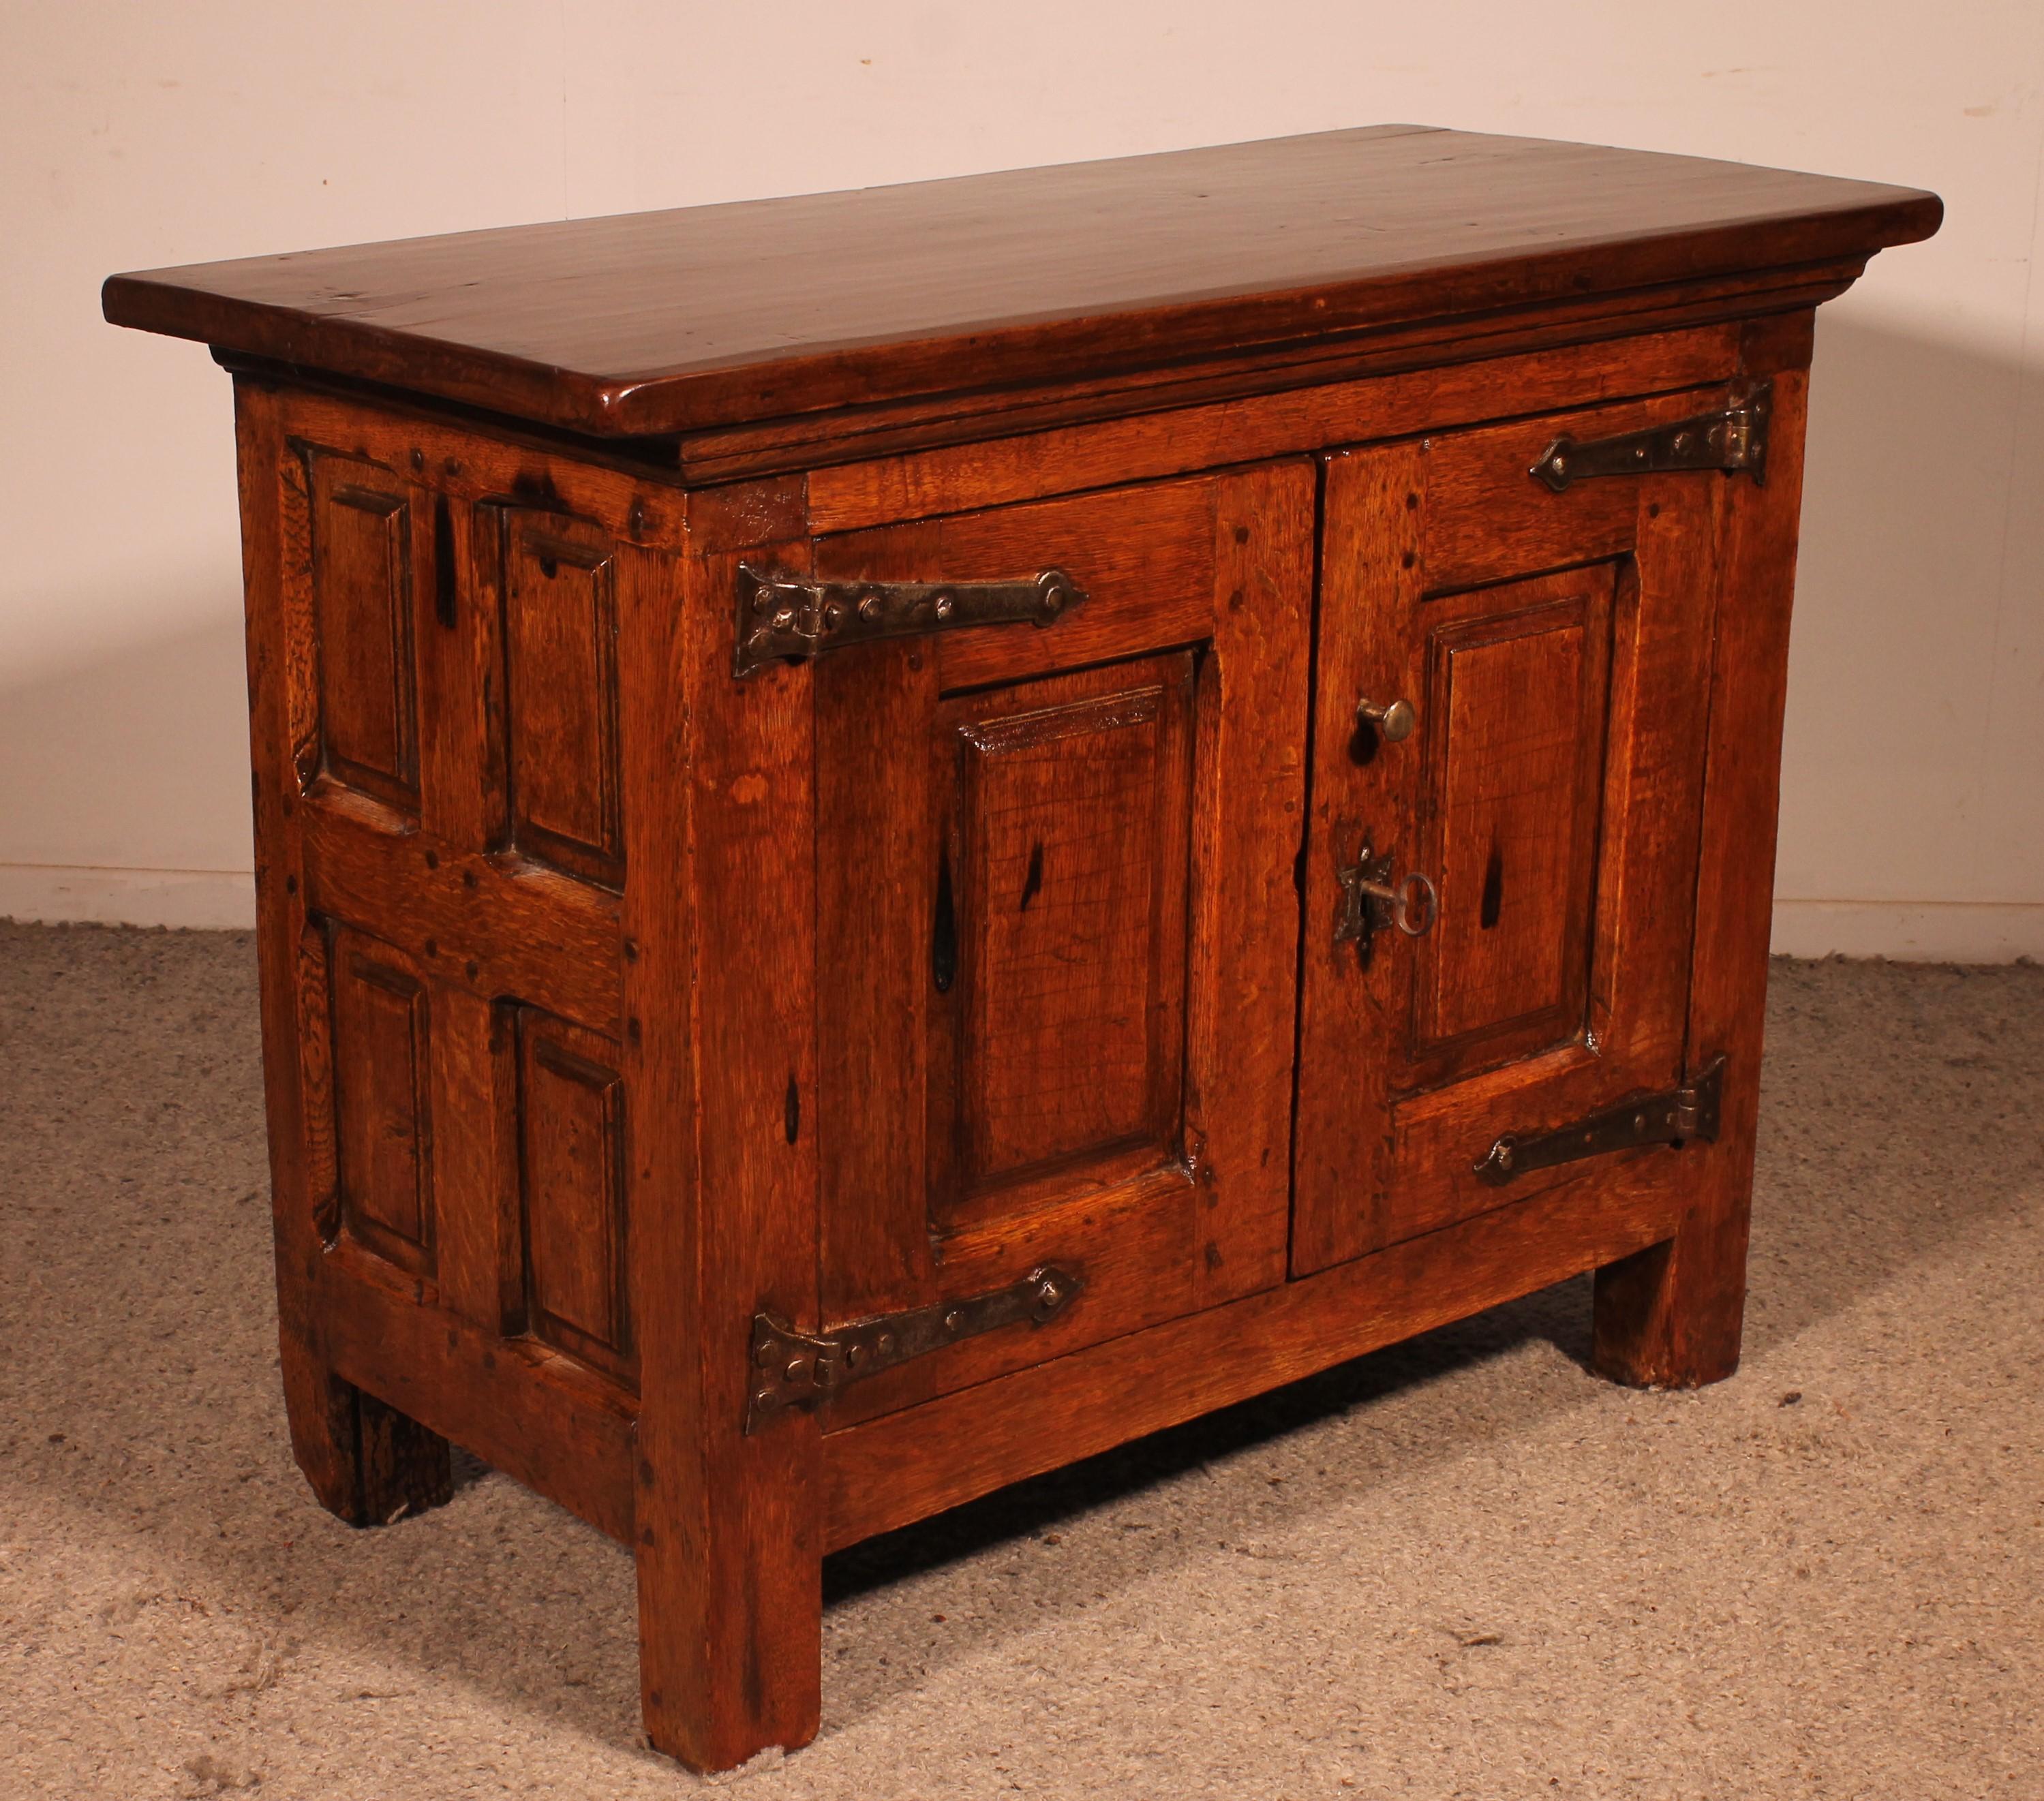 small 2 door buffet or cupboard in oak and walnut from the 17th century from Spain

small unusual model with very beautiful carved panels as well as paneled sides.

It has its original lock and key
Very beautiful irons on the two doors typical of